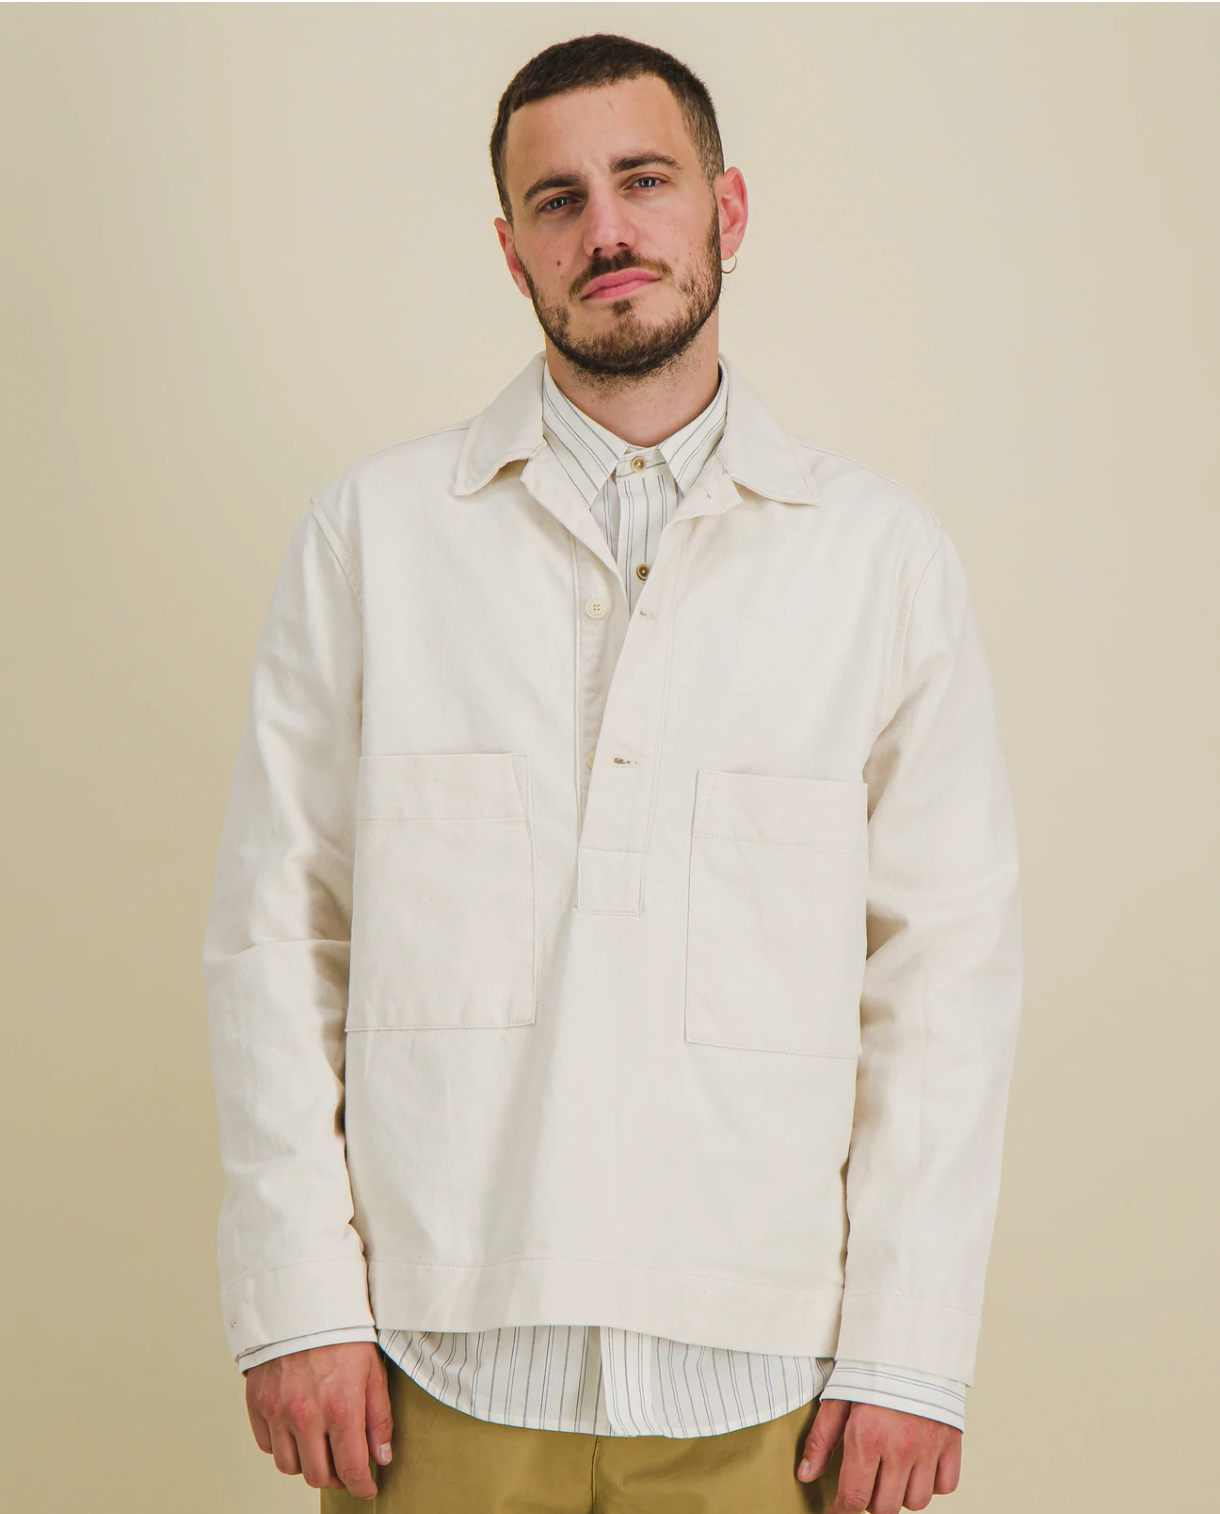 Outland Wear France Painter Overshirt , Overshirts, Outland, Working Title